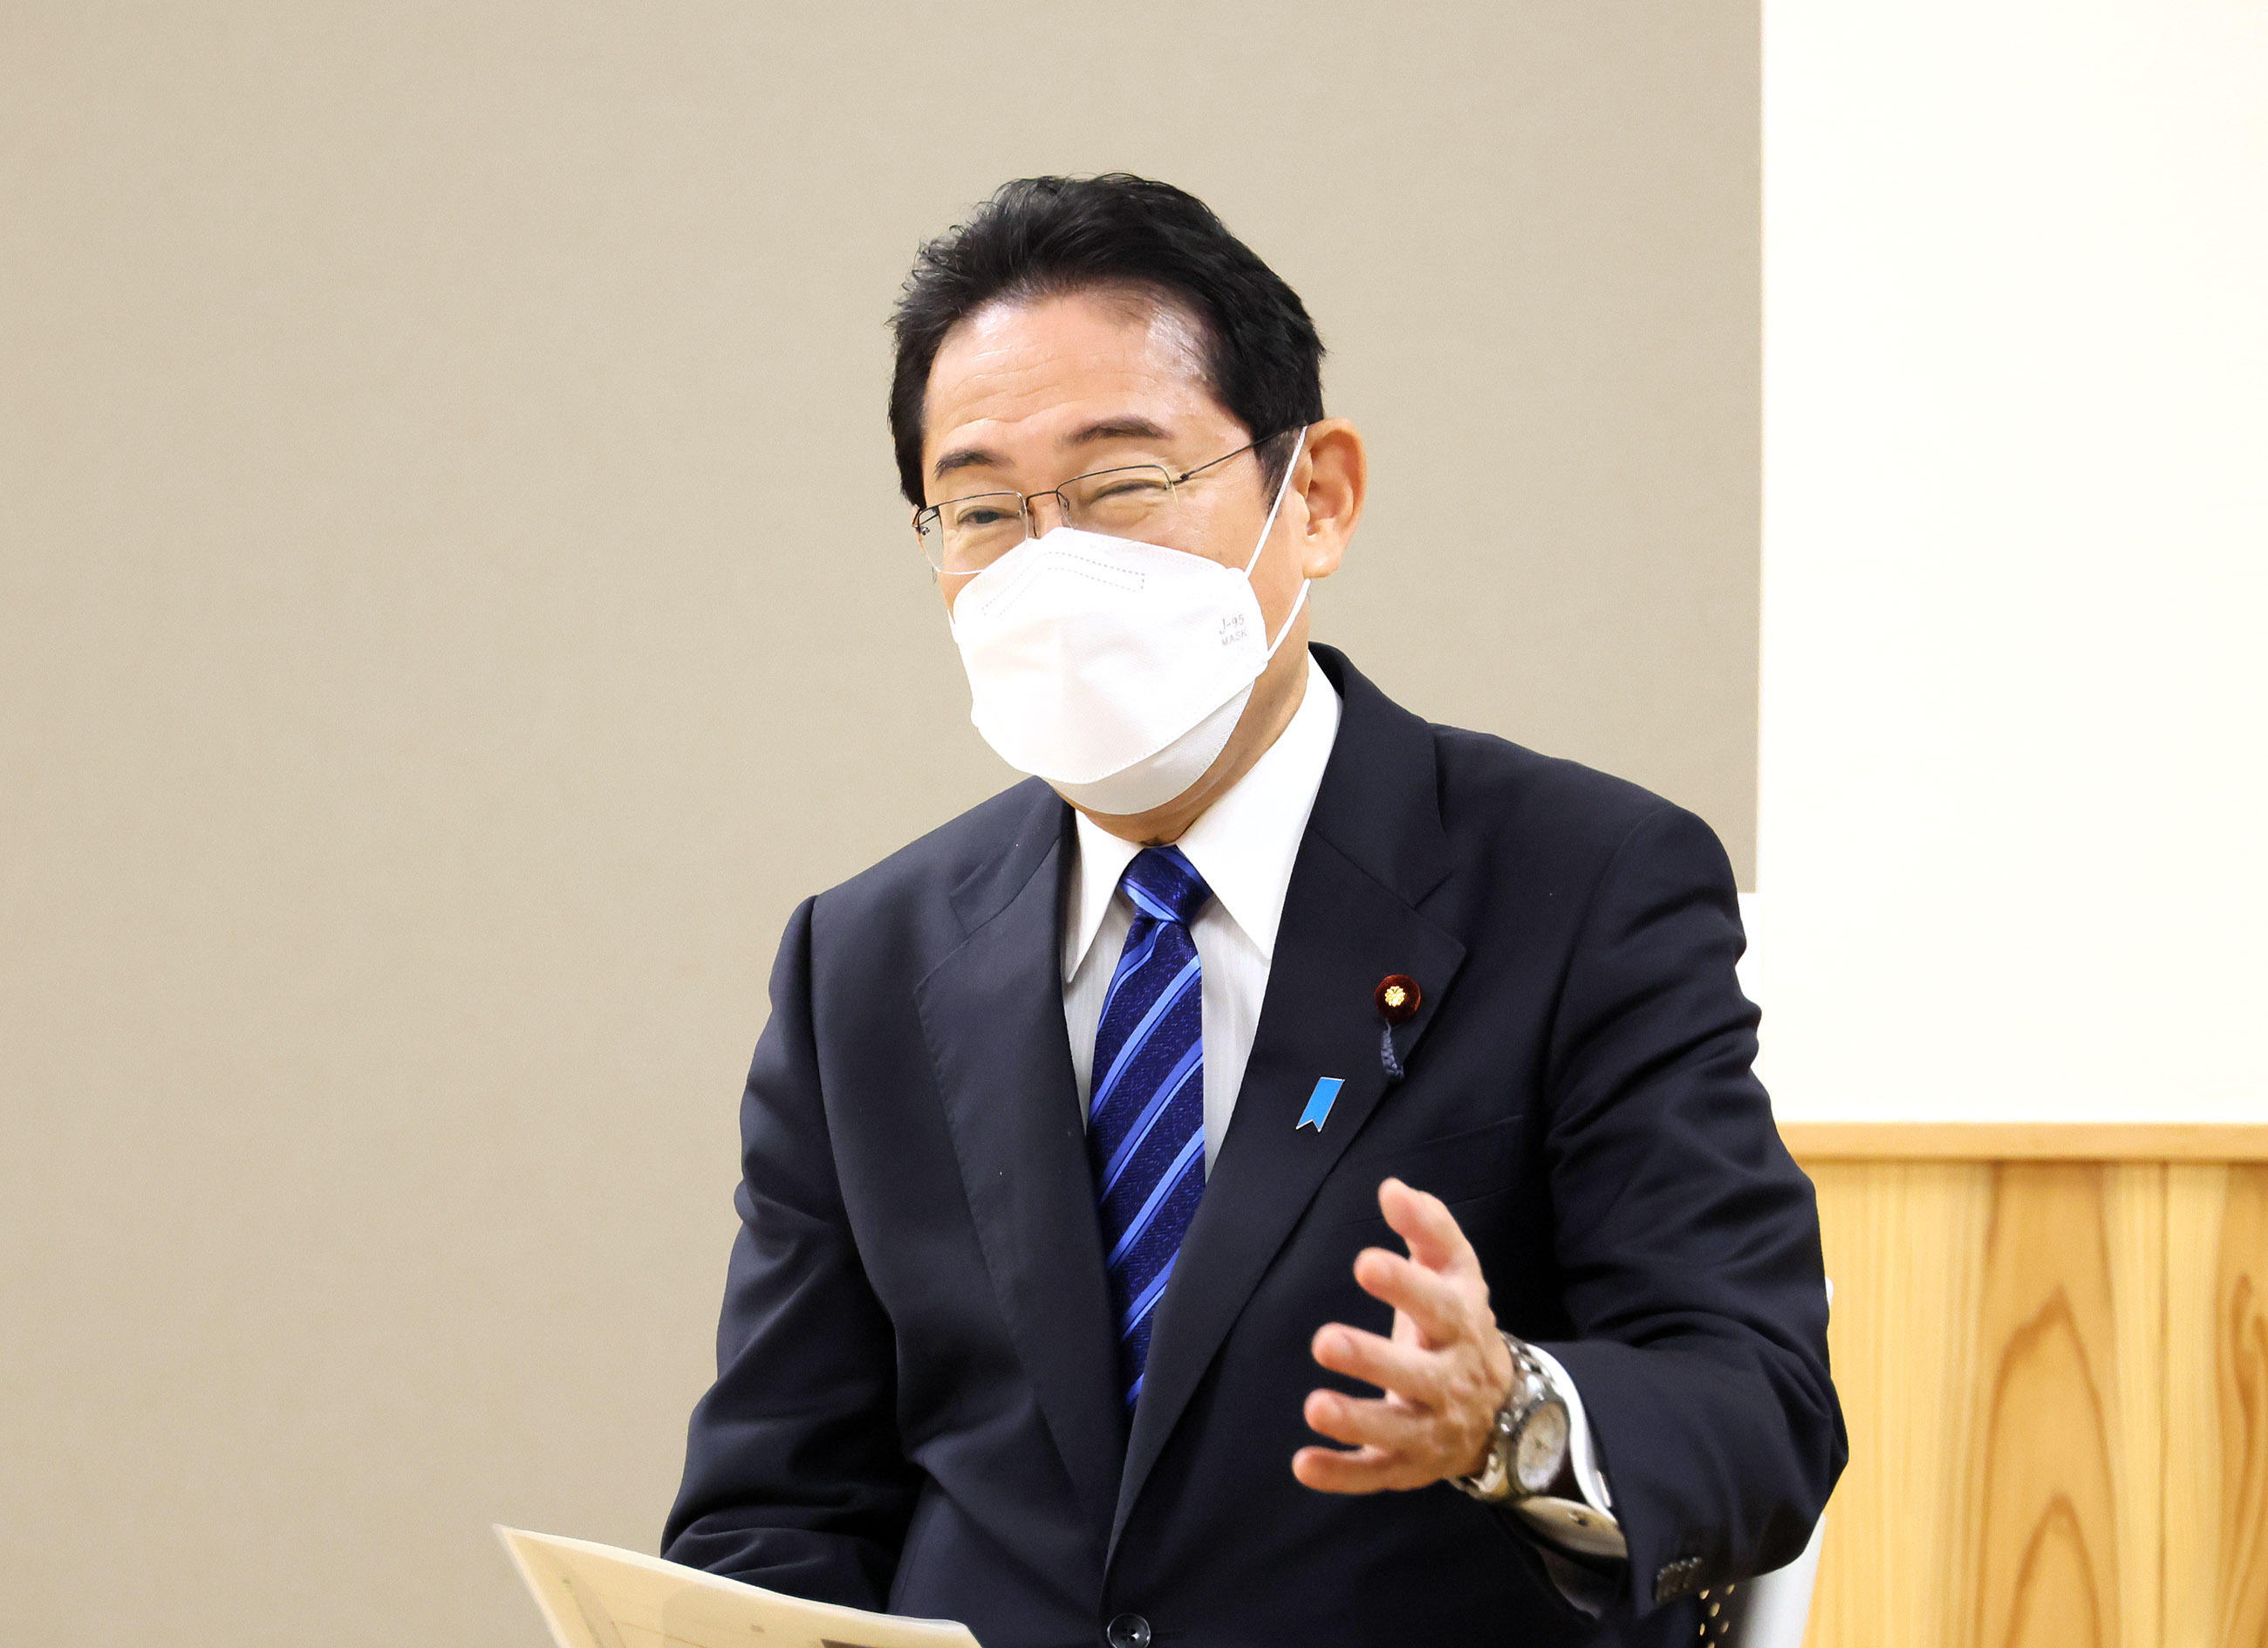 Prime Minister Kishida making remarks in a small group talk